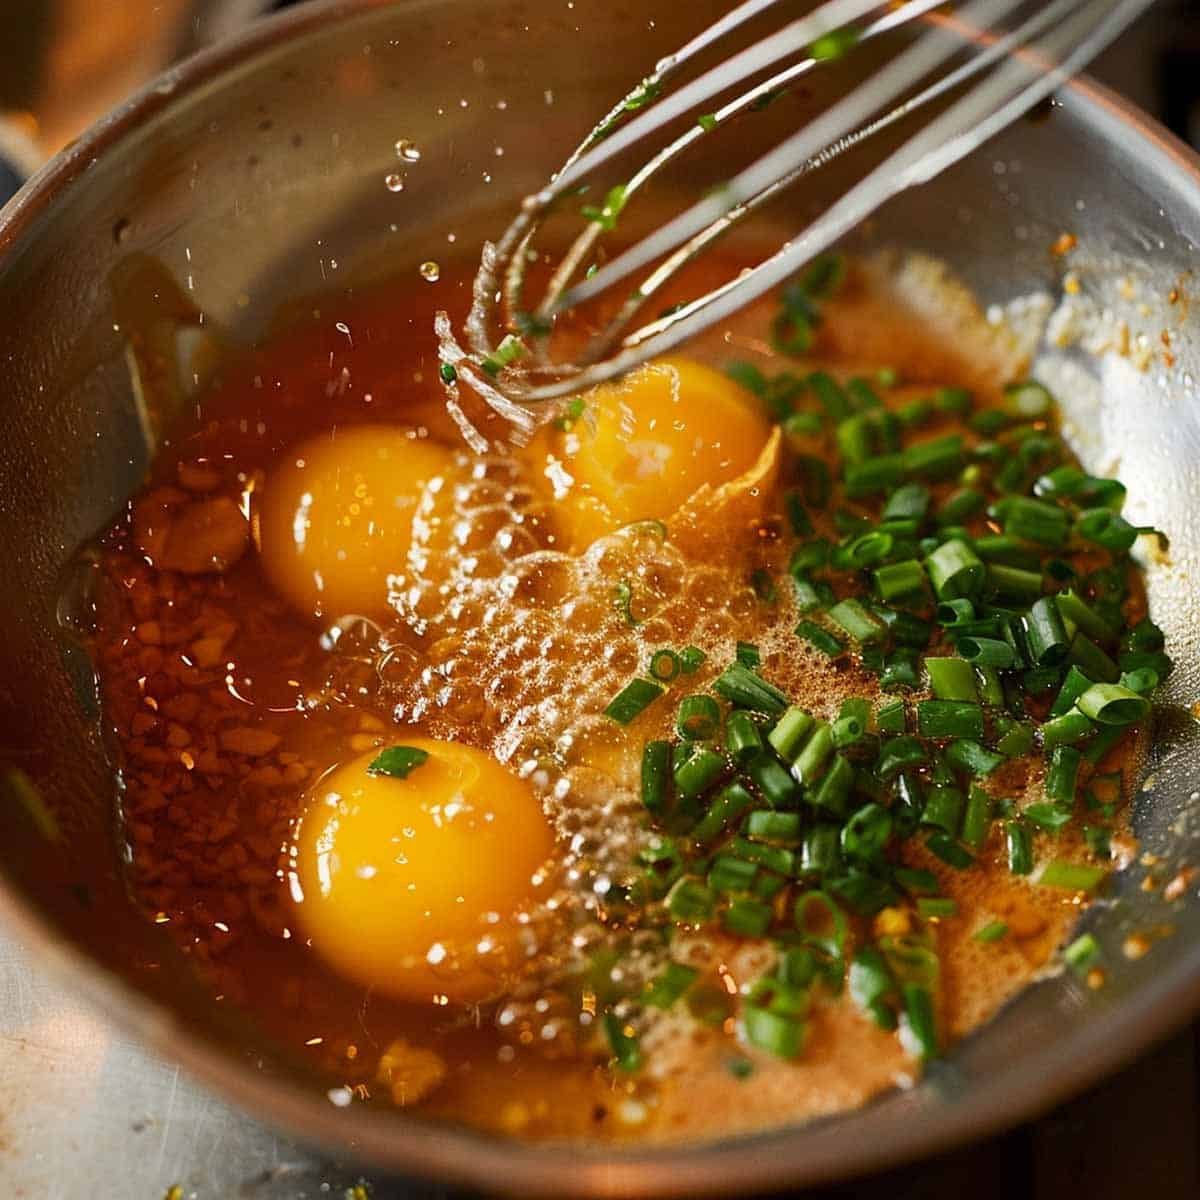 Eggs and diced spring onions being whisked in a bowl